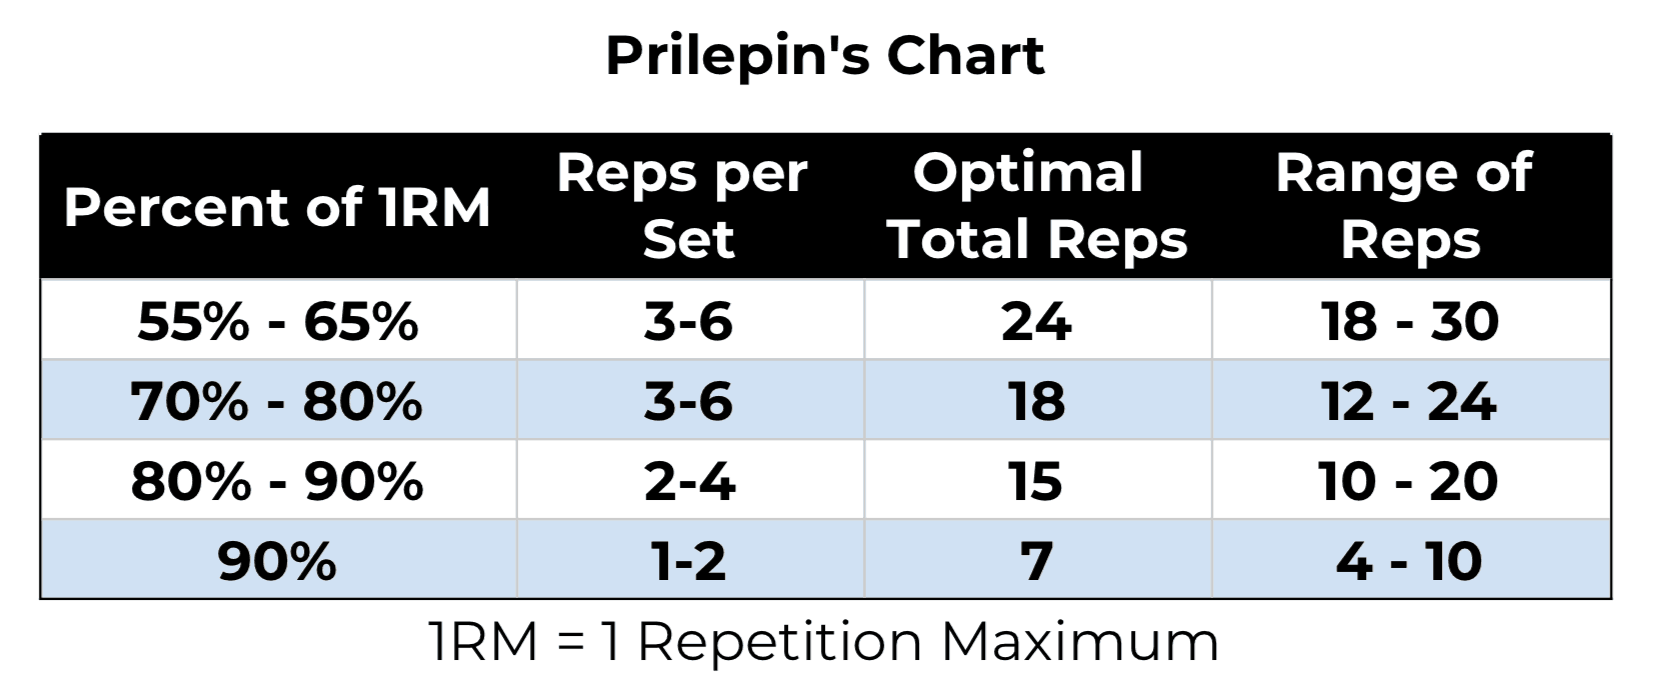 Prilepins-Chart-for-Olympic-Weightlifting-Training-Rep-Ranges-FitAtMidlife